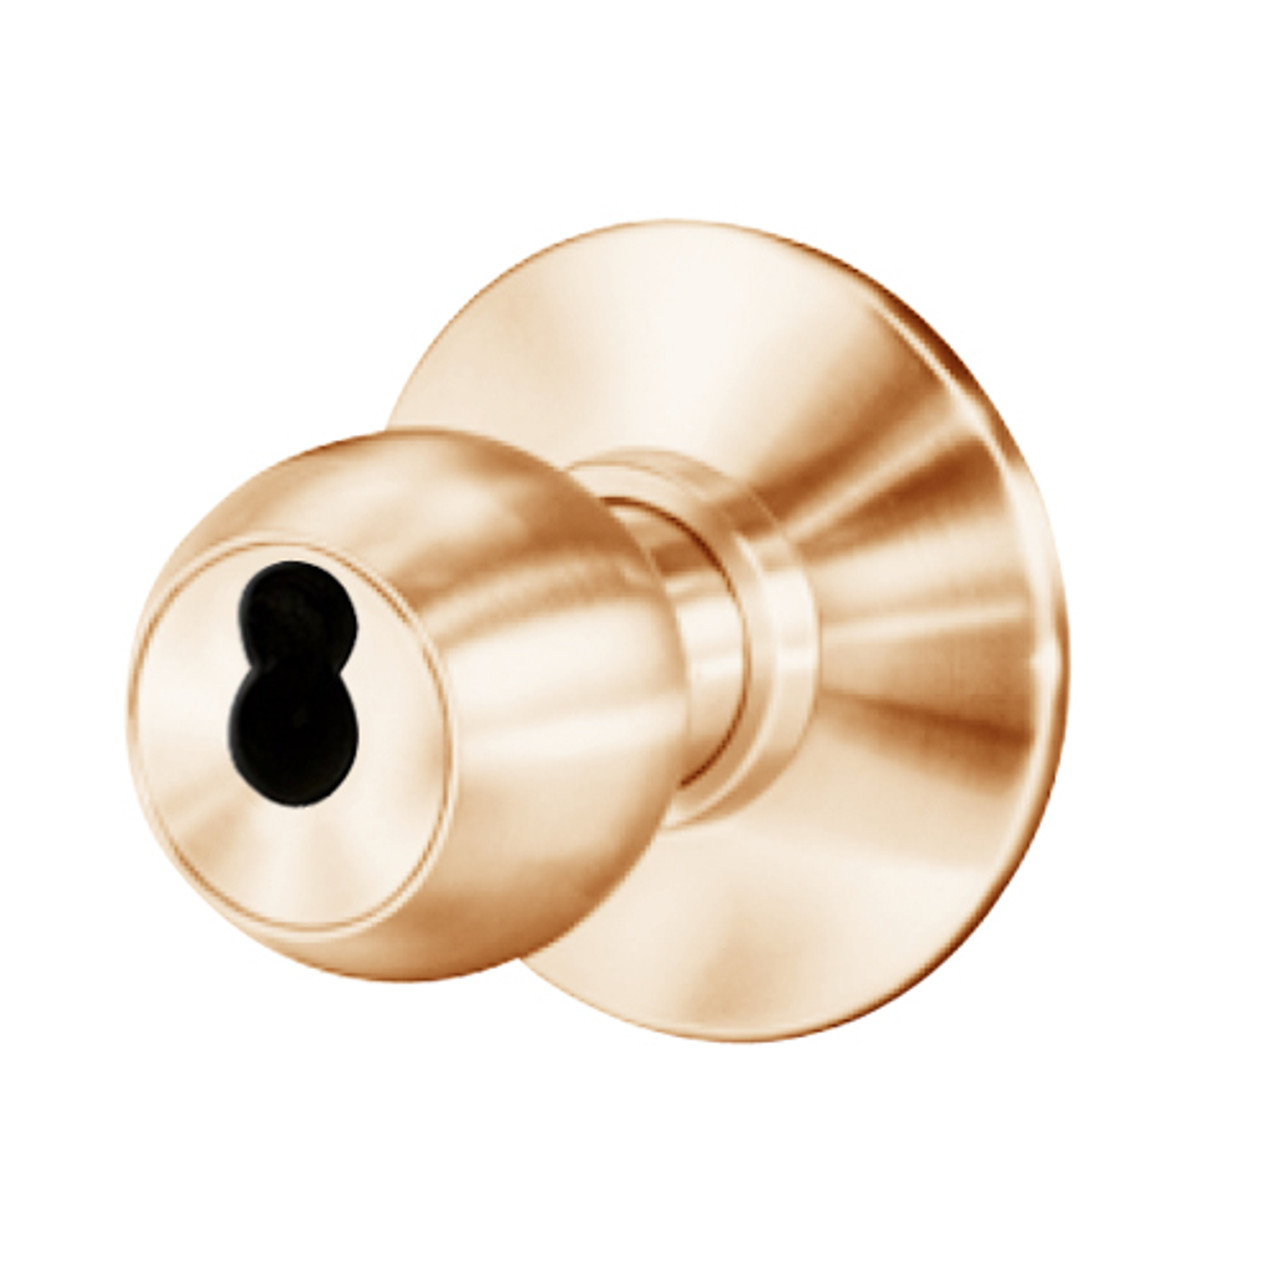 8K37XR4DS3611 Best 8K Series Special Heavy Duty Cylindrical Knob Locks with Round Style in Bright Bronze